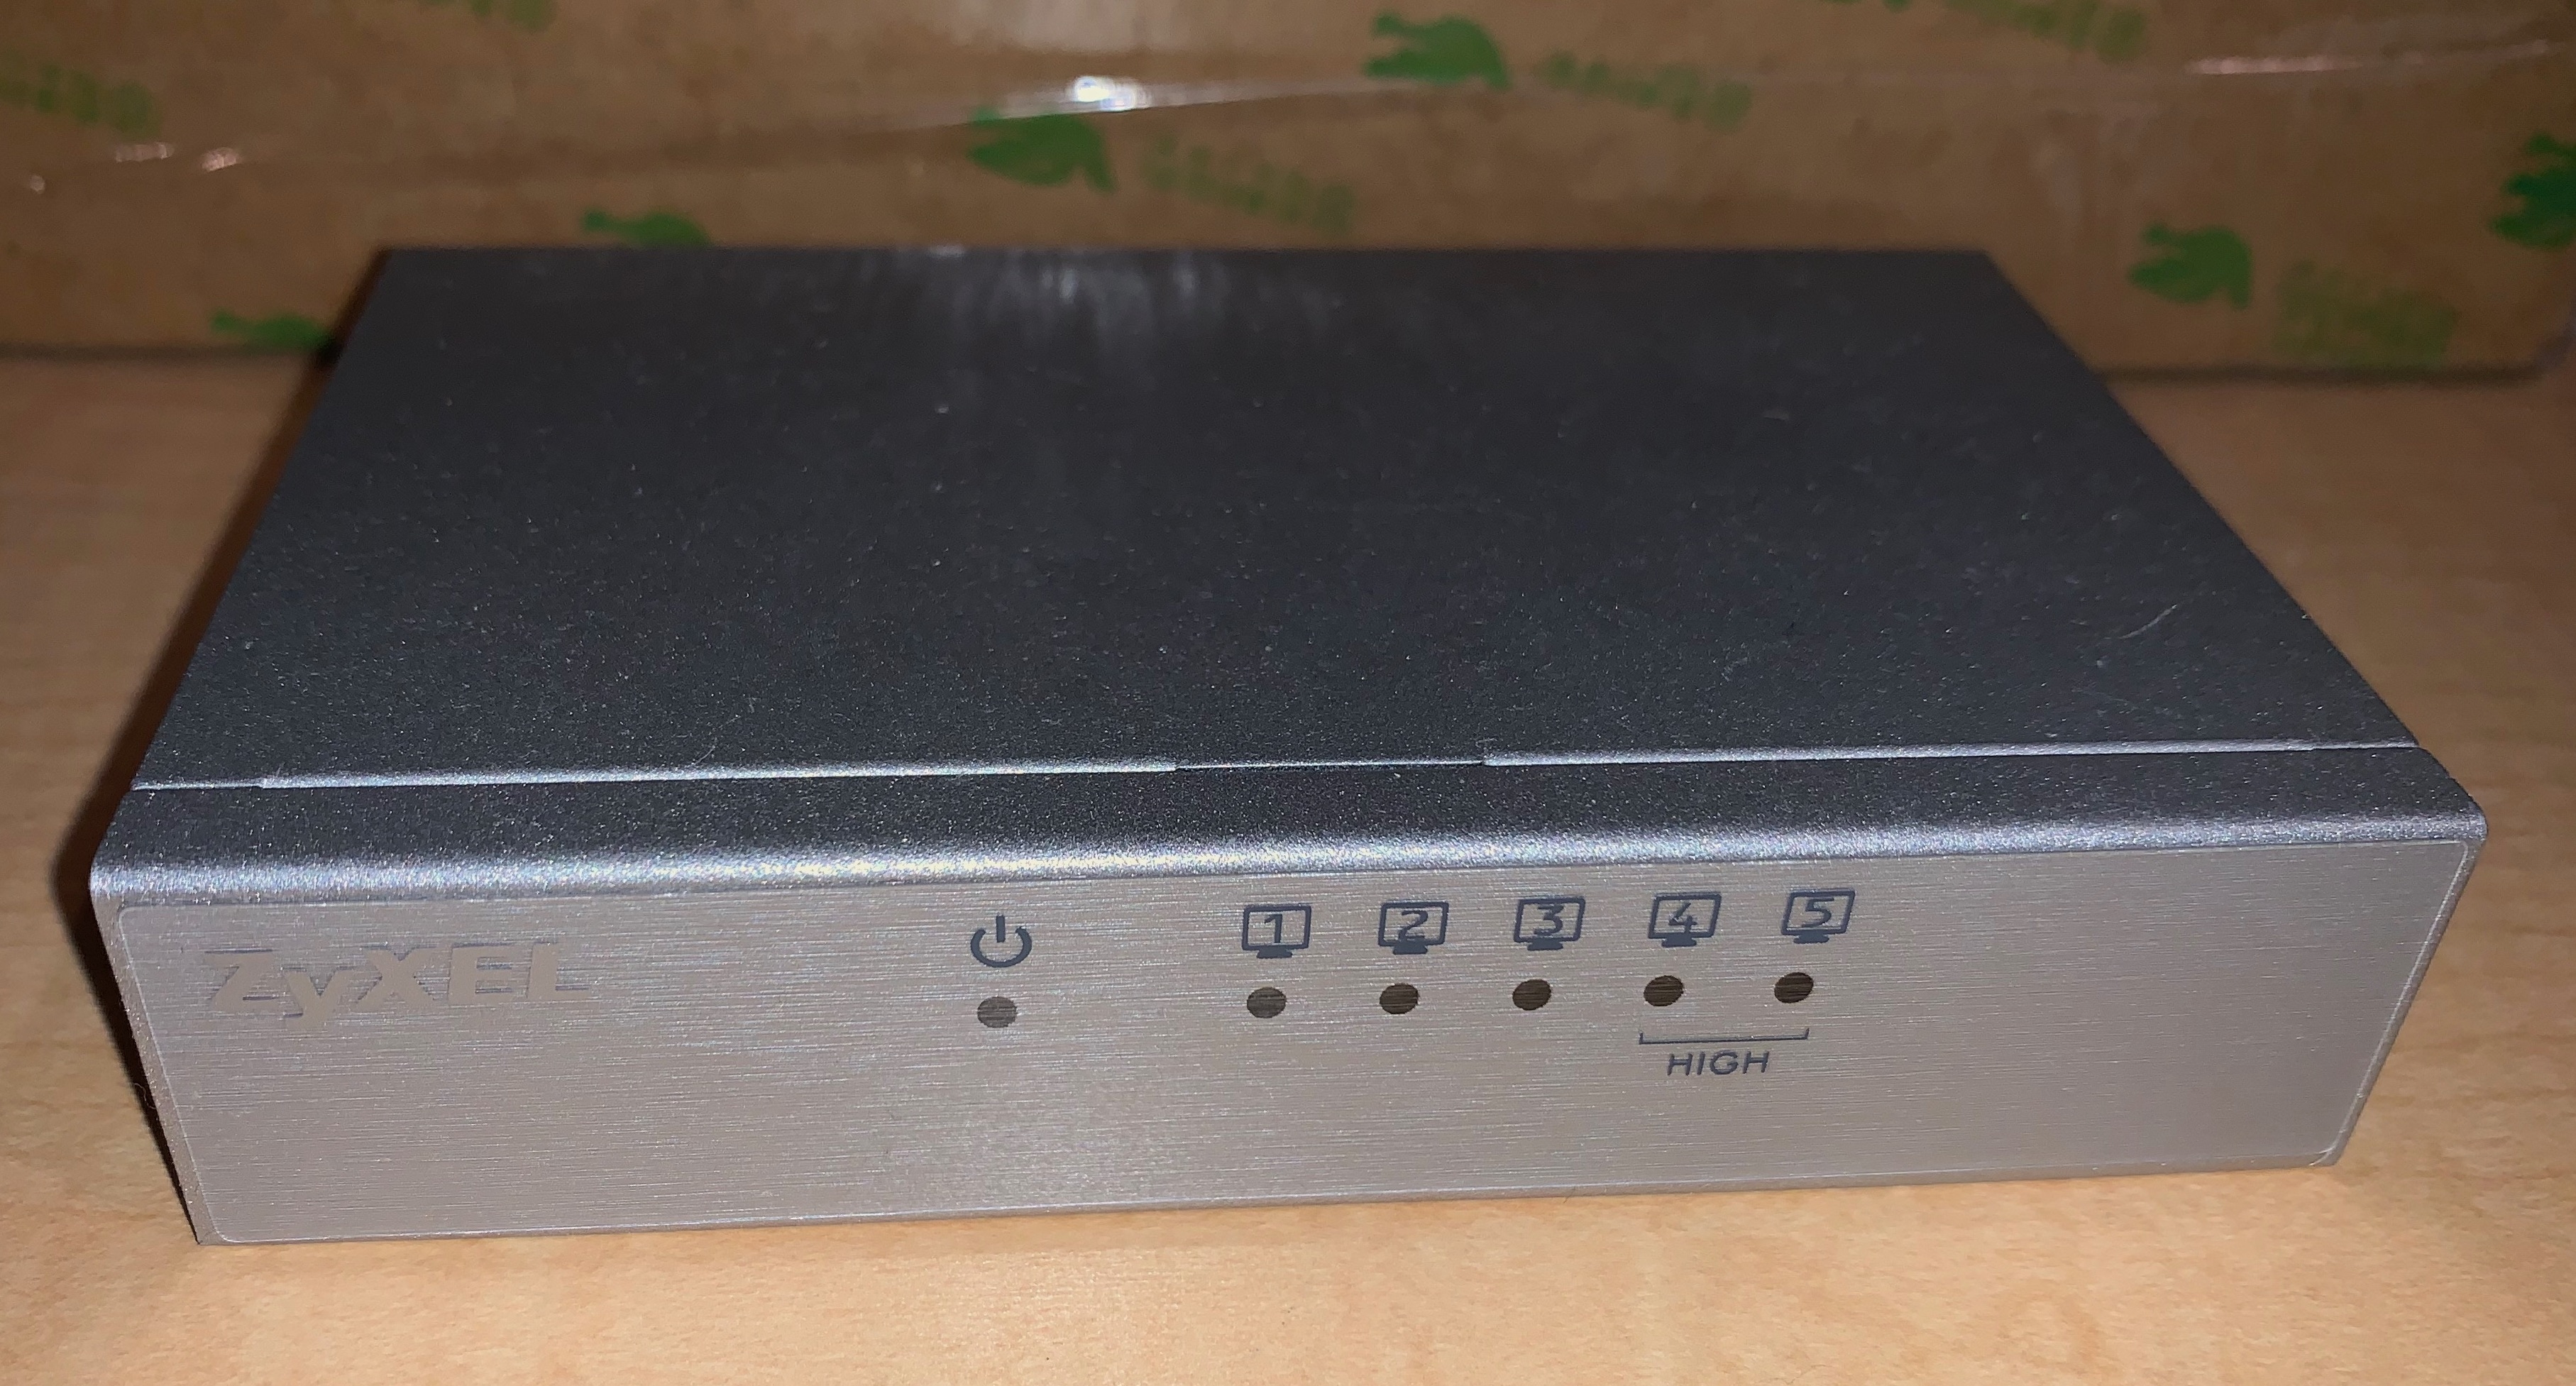 FS: Paul Pang ZyXEL ethernet switch - Buy & Sell Audio and Computer ...